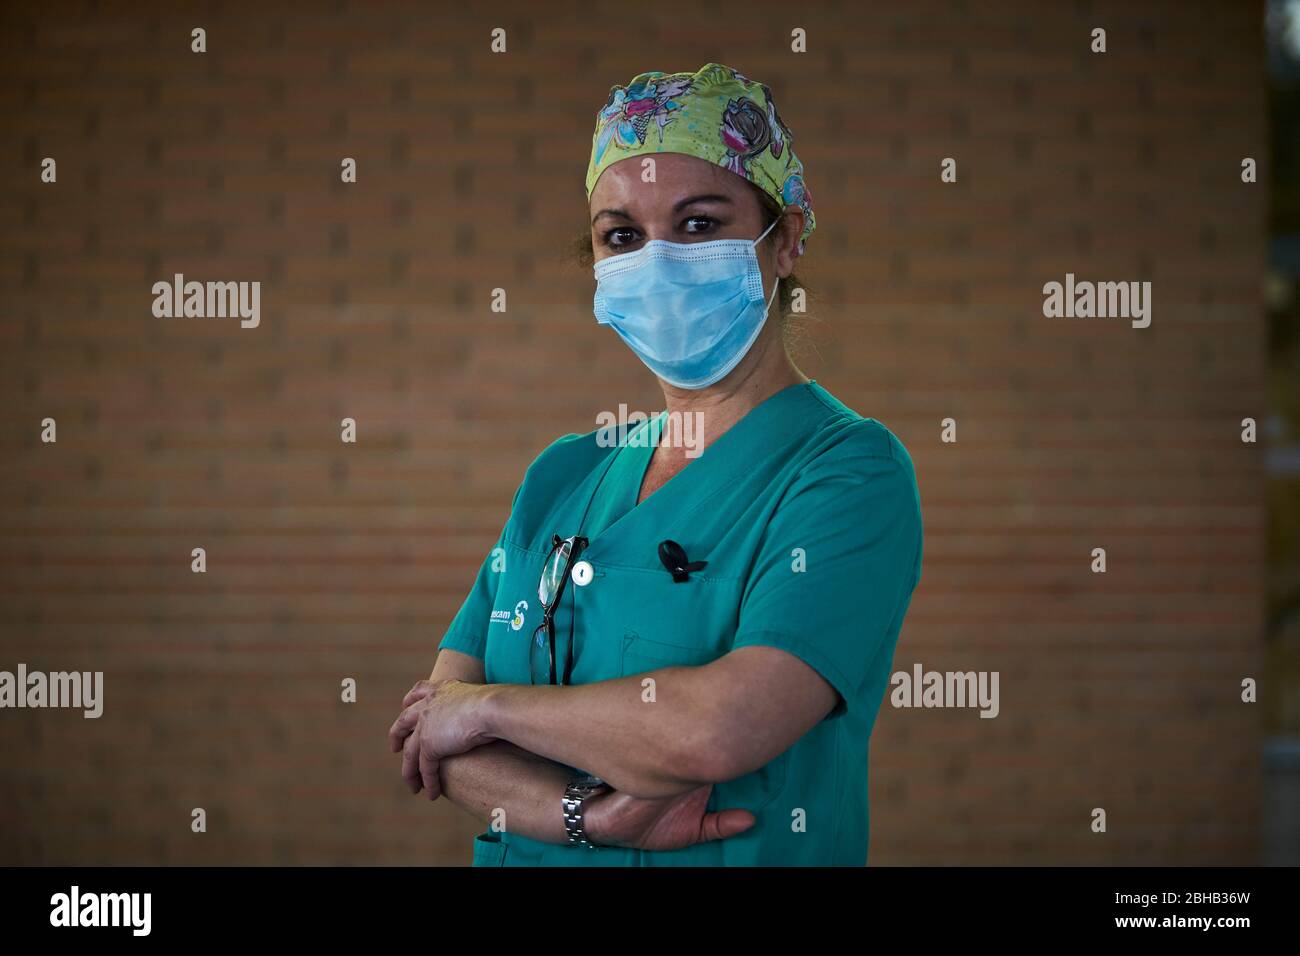 A hospital worker wearing protective gear in a moment of silence for the victims of the pandemic COVID19 during the applause.Since the start of the coronavirus outbreak and the state of alarm decreed by the Spanish government, people at 8pm as a tribute applaud the health personnel who return the applause from the different hospitals together with the police and members of civil protection. Stock Photo